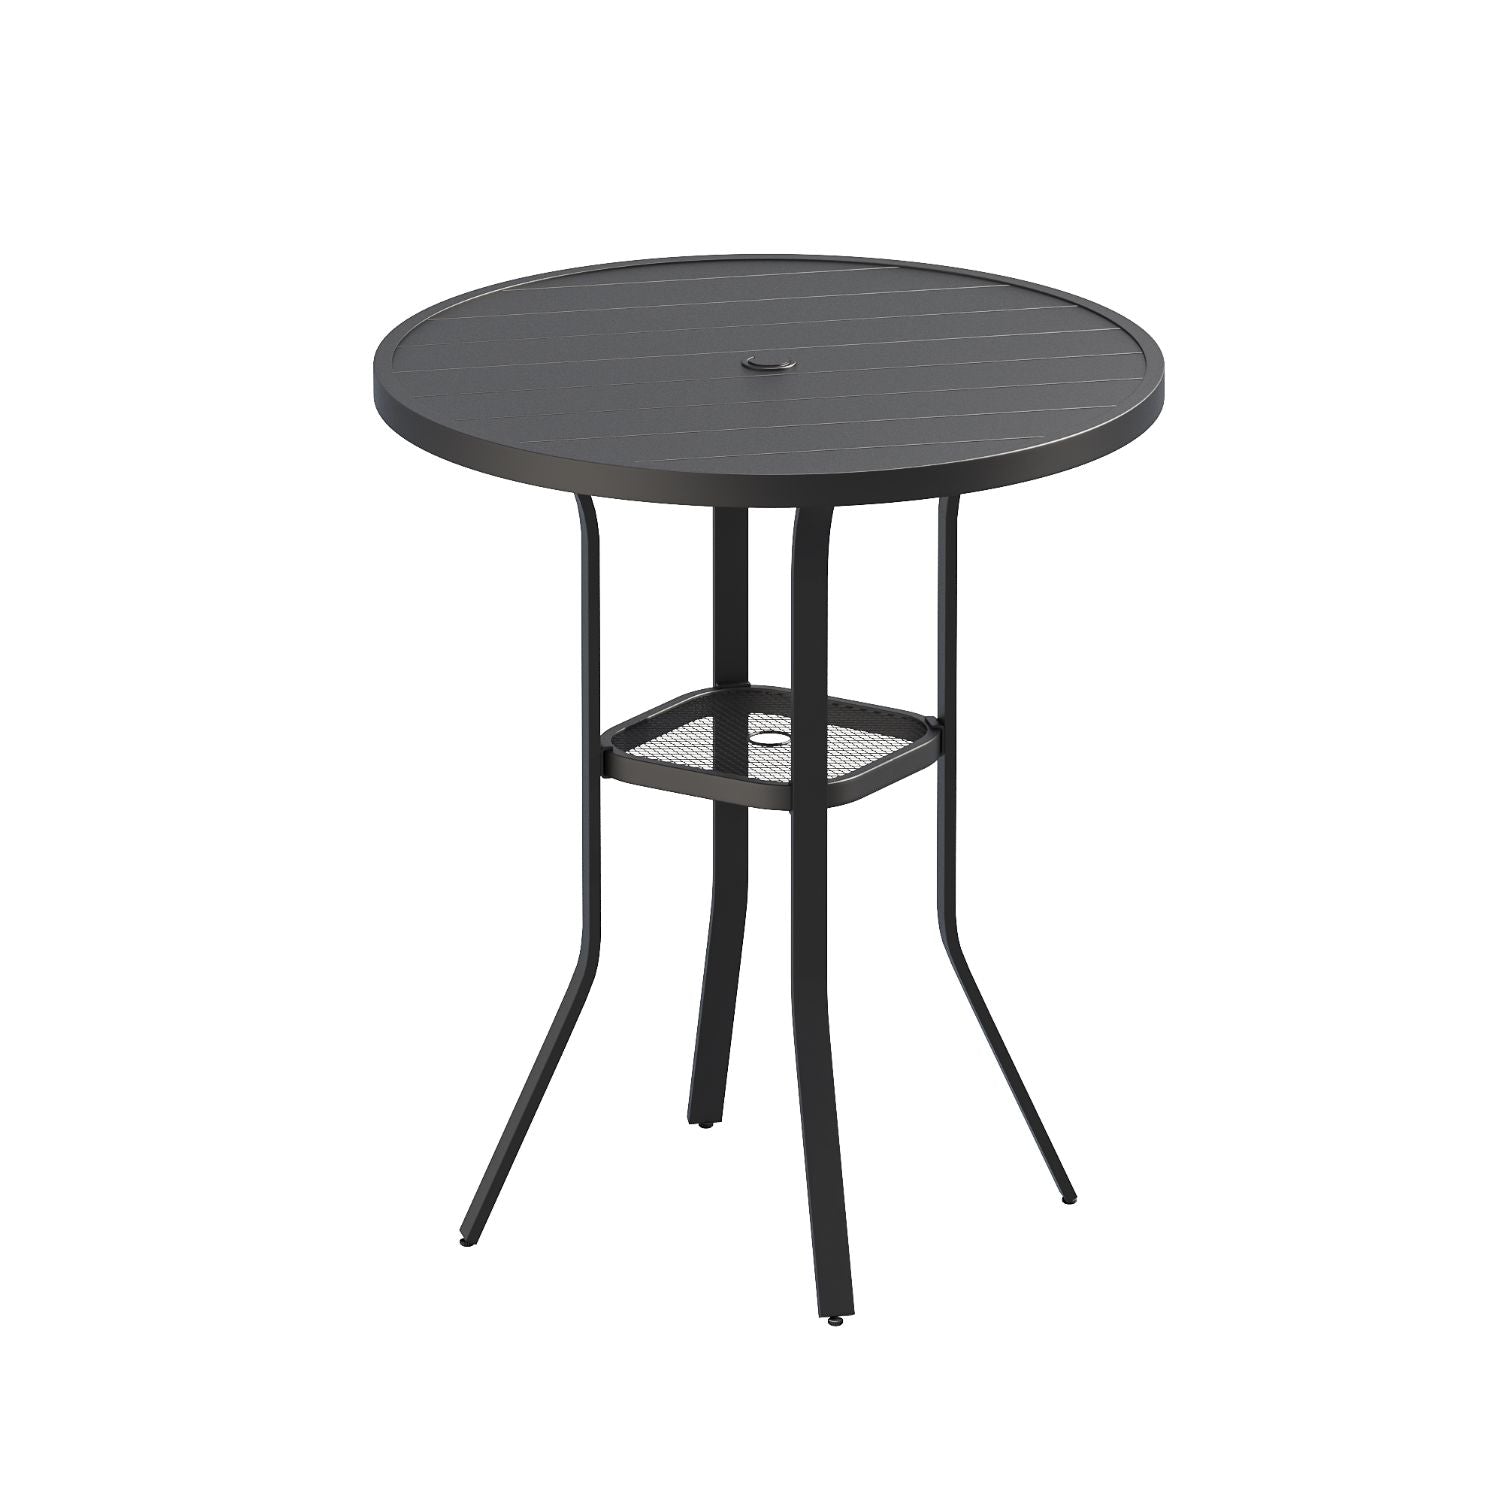 Vicllax Patio 37" Round Bar Table with Umbrella Hole and Storage Shelf